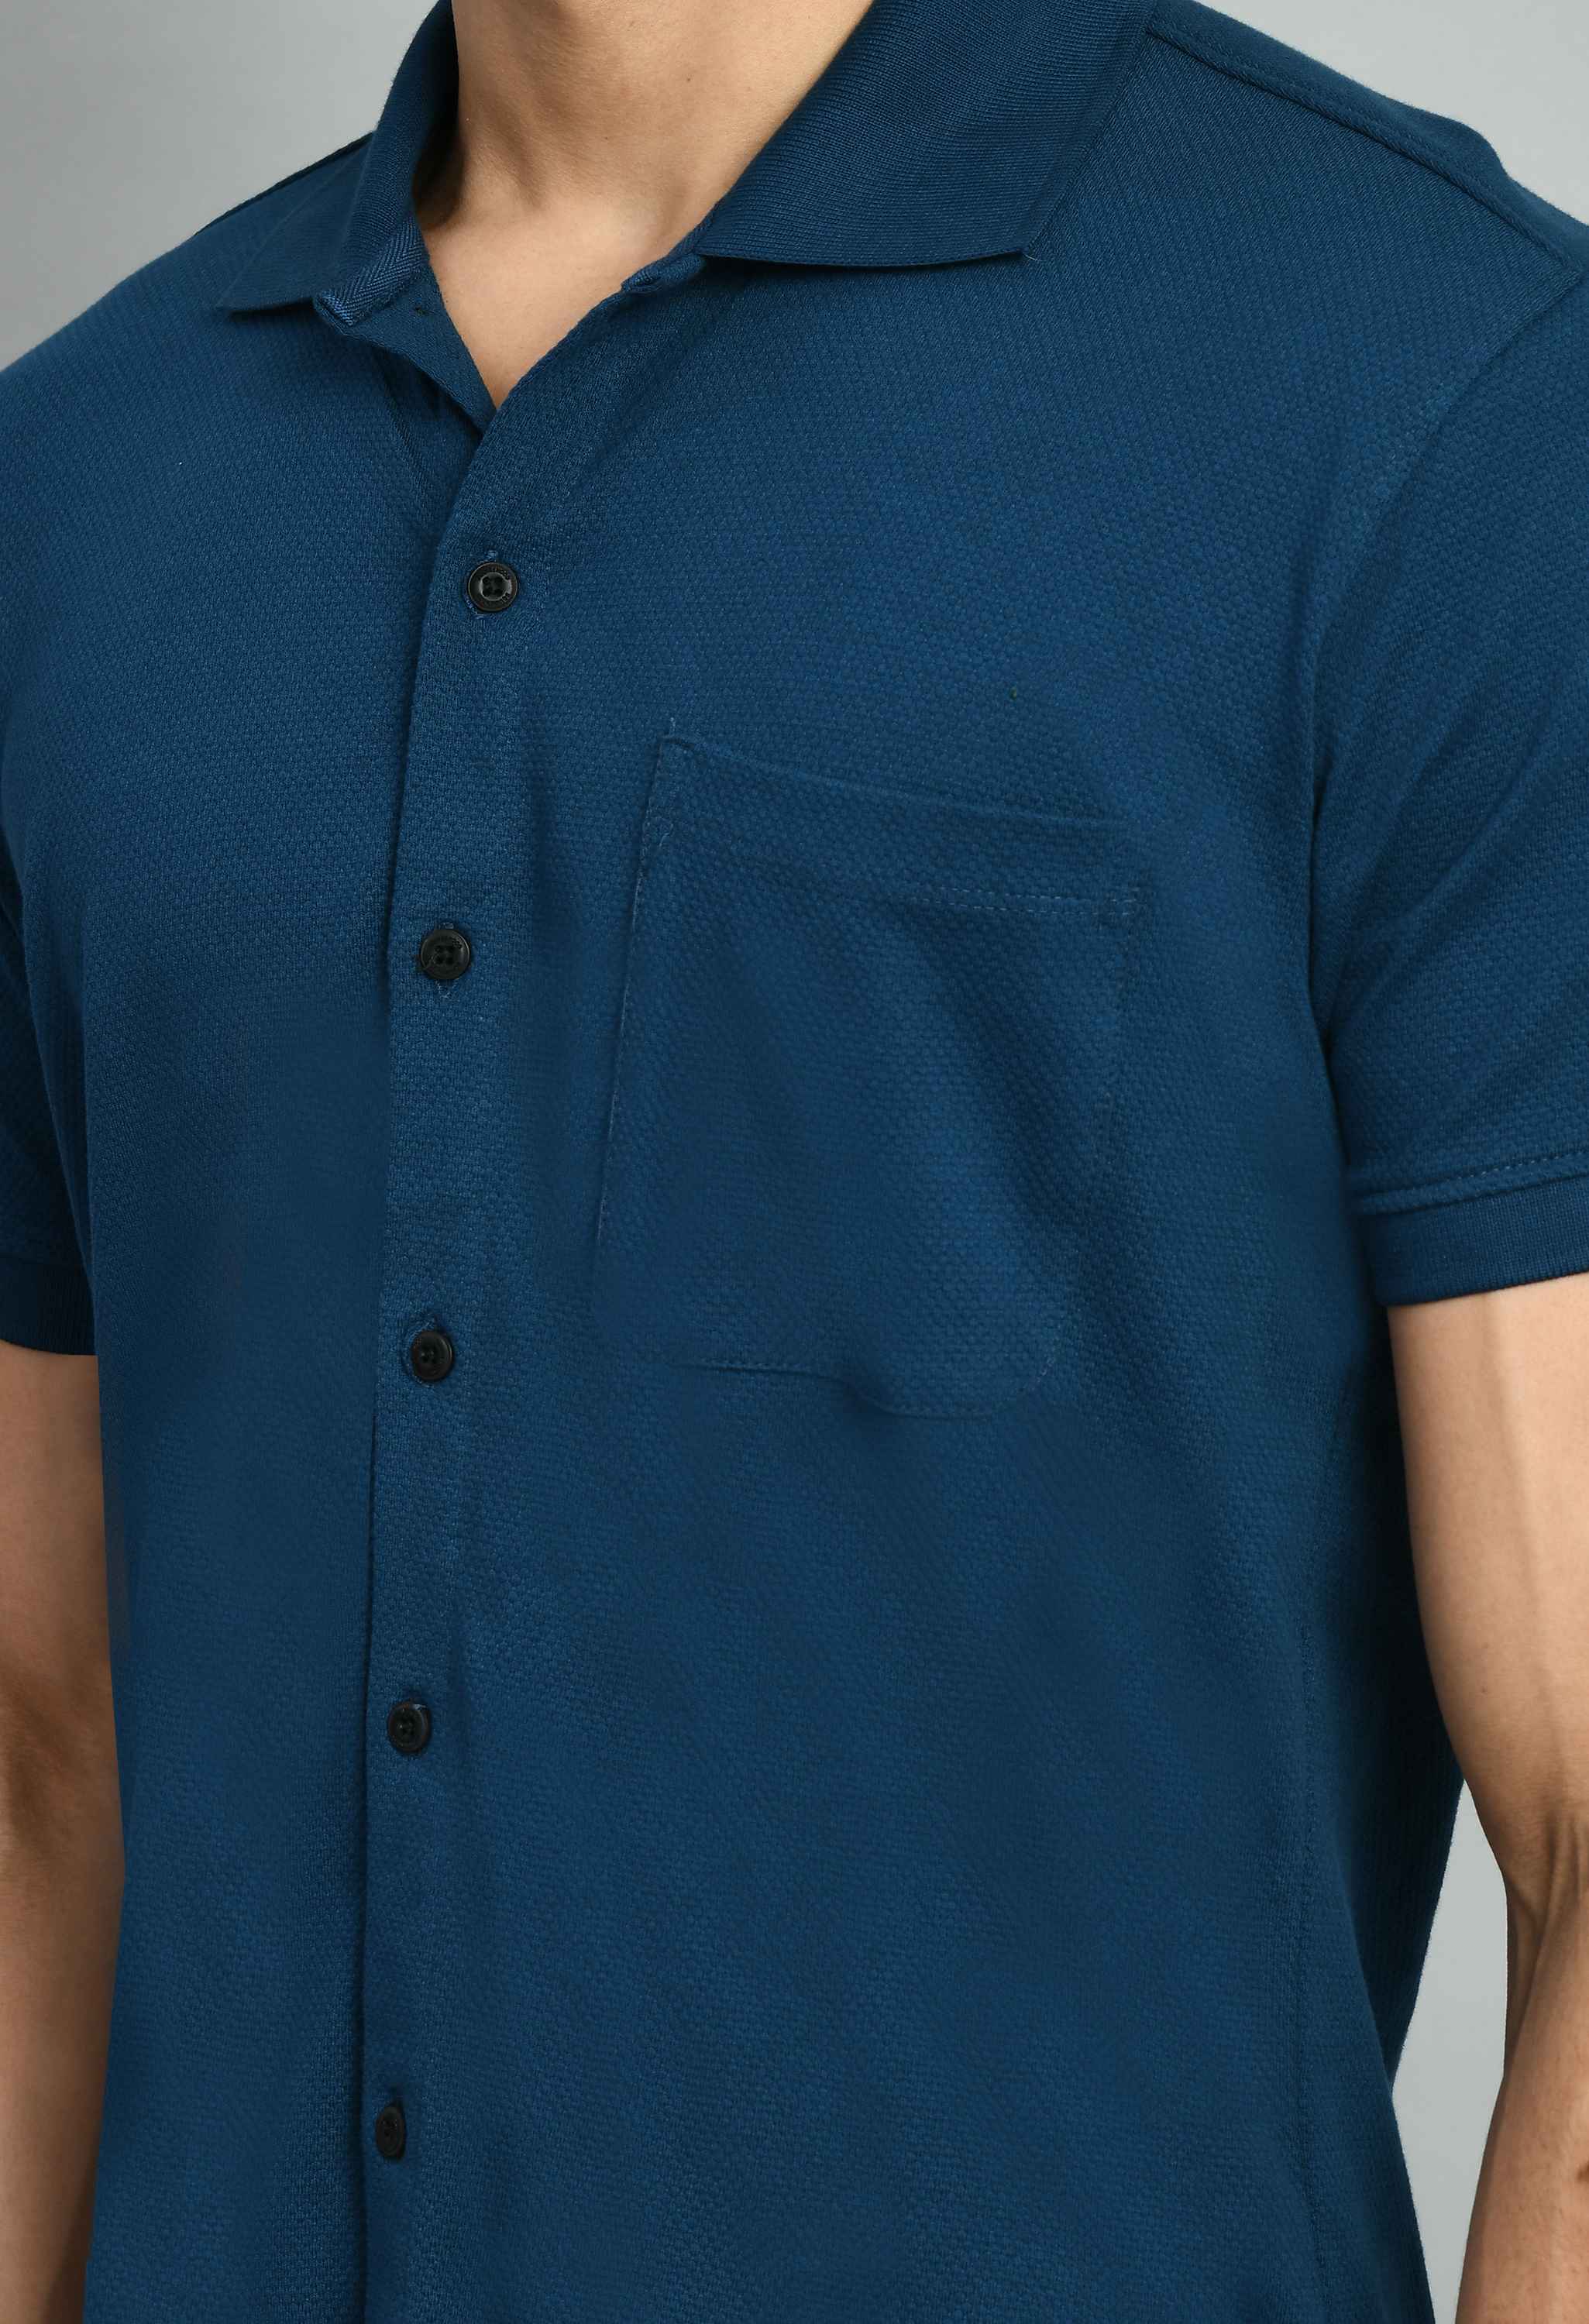 Men's Tint Blue Solid Casual Shirt - SQUIREHOOD